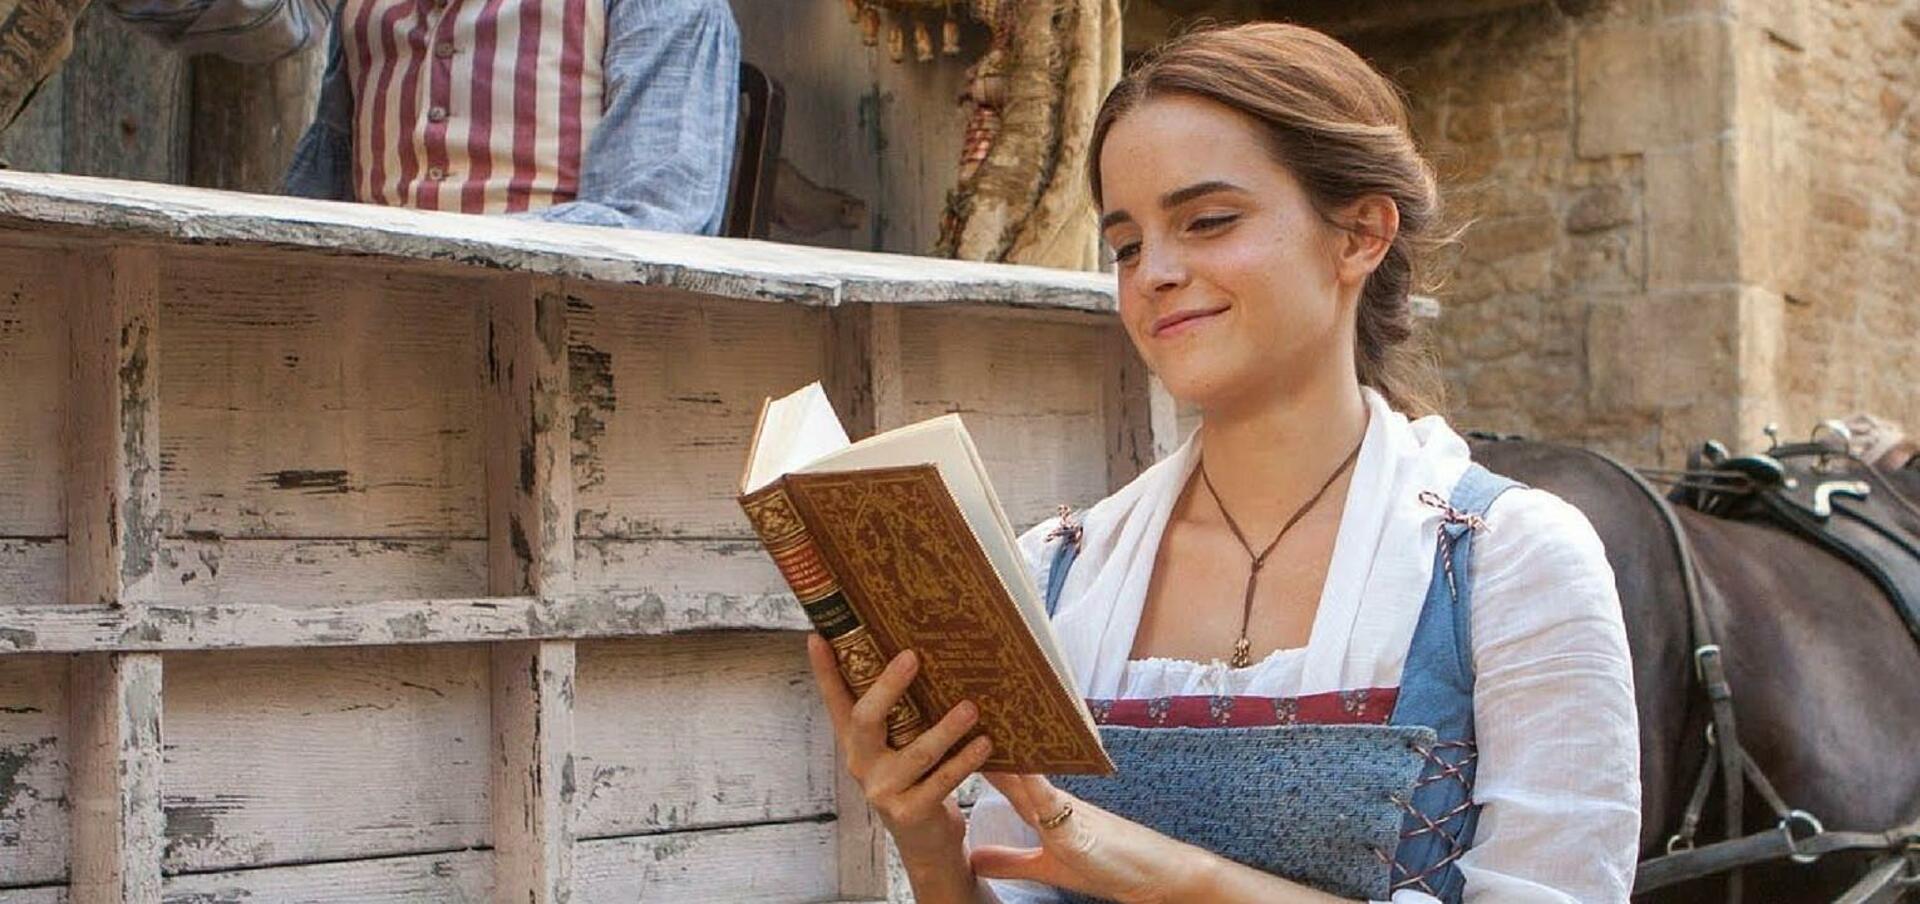 Emma Watson Book Recommendations: What is Her Favorite Harry Potter Book?